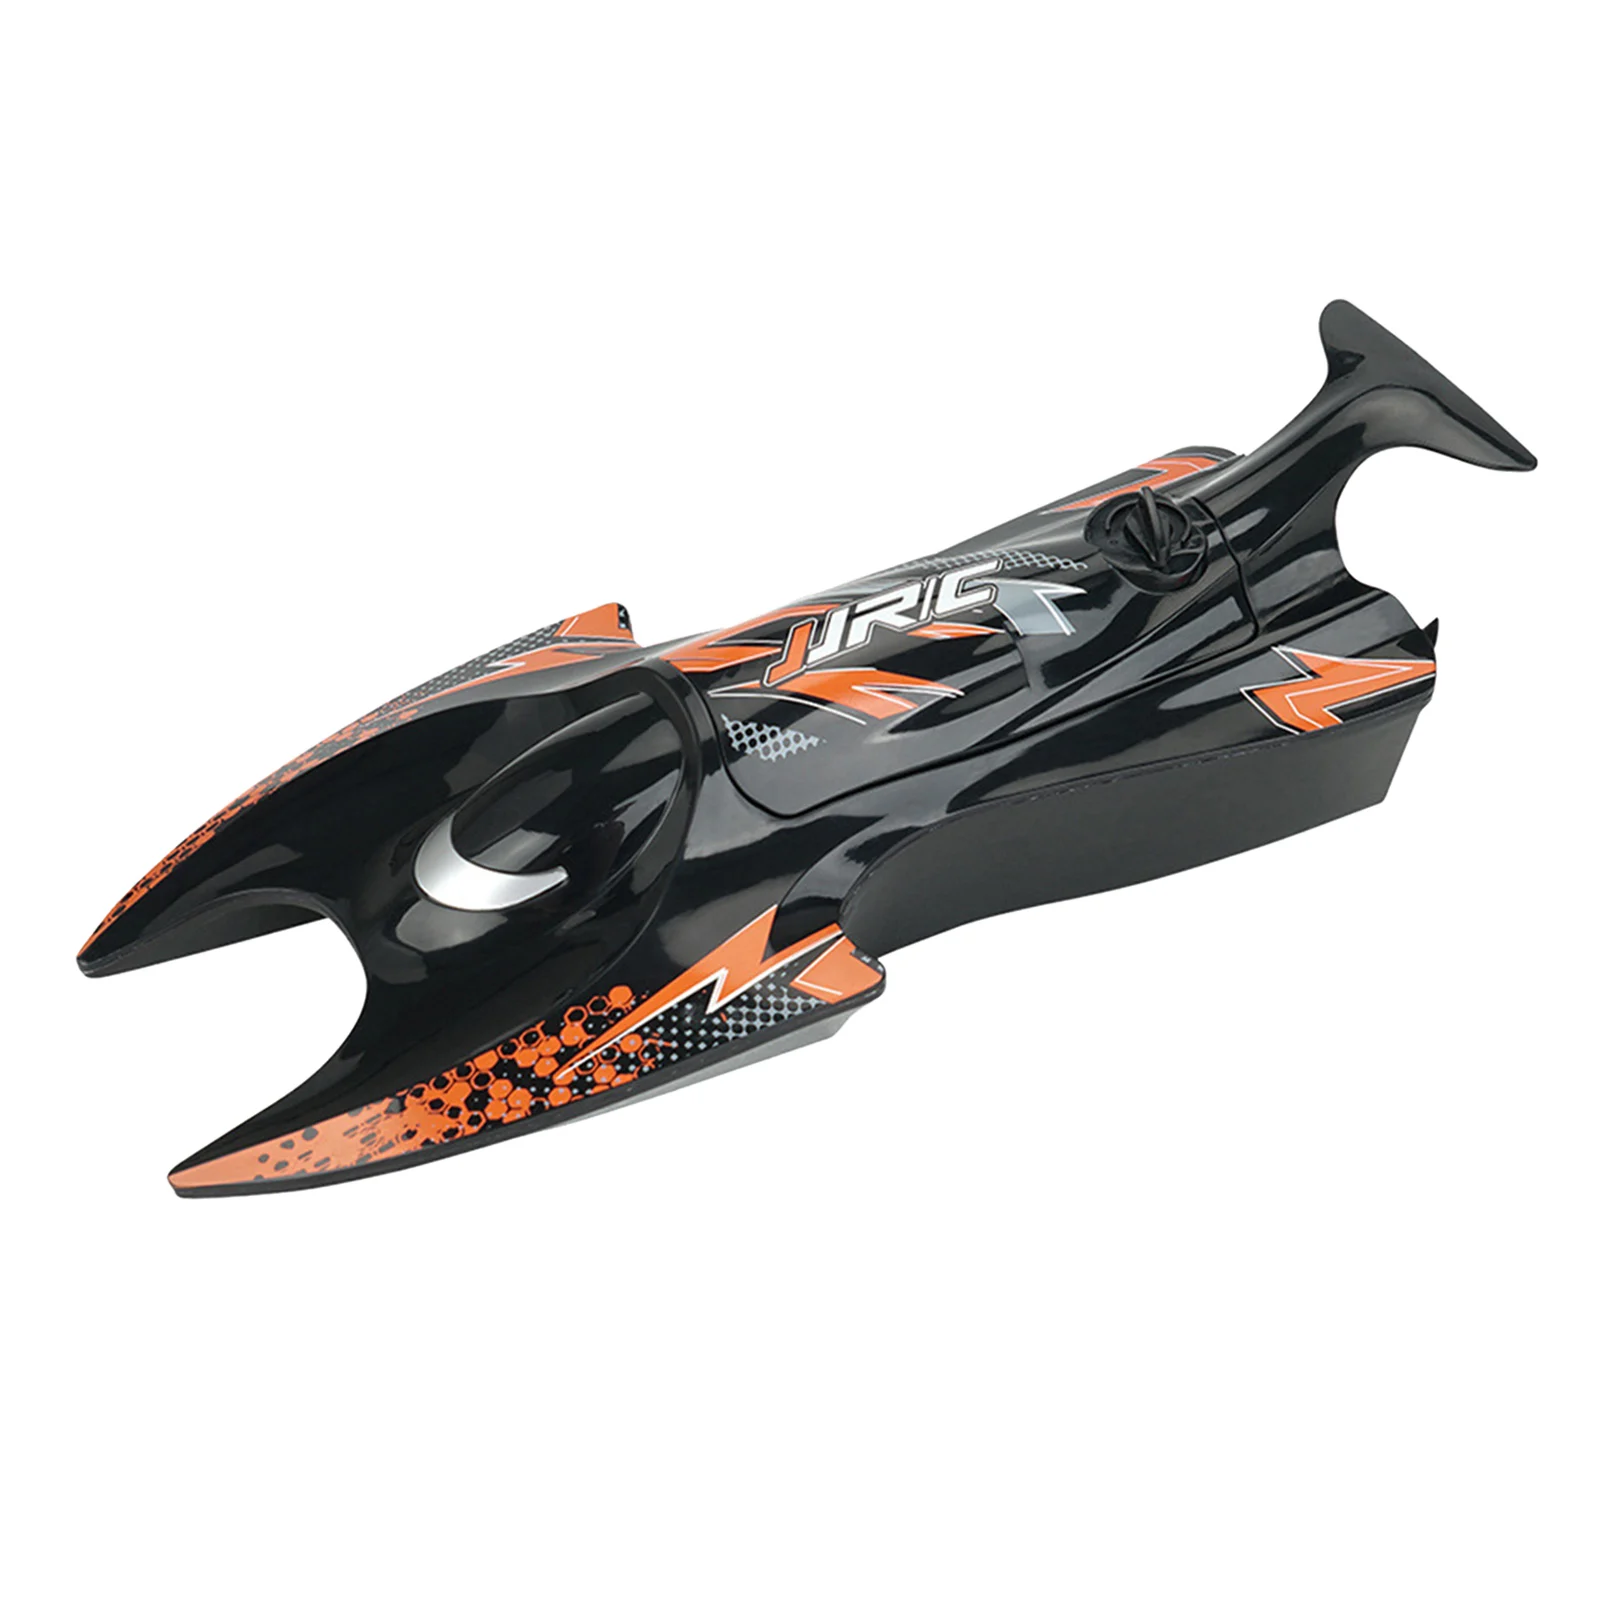  Boat Toy Lobster Shaped Dual Motors High  Lobster Long-Lasting  Boat Electric for Lake Swimming 